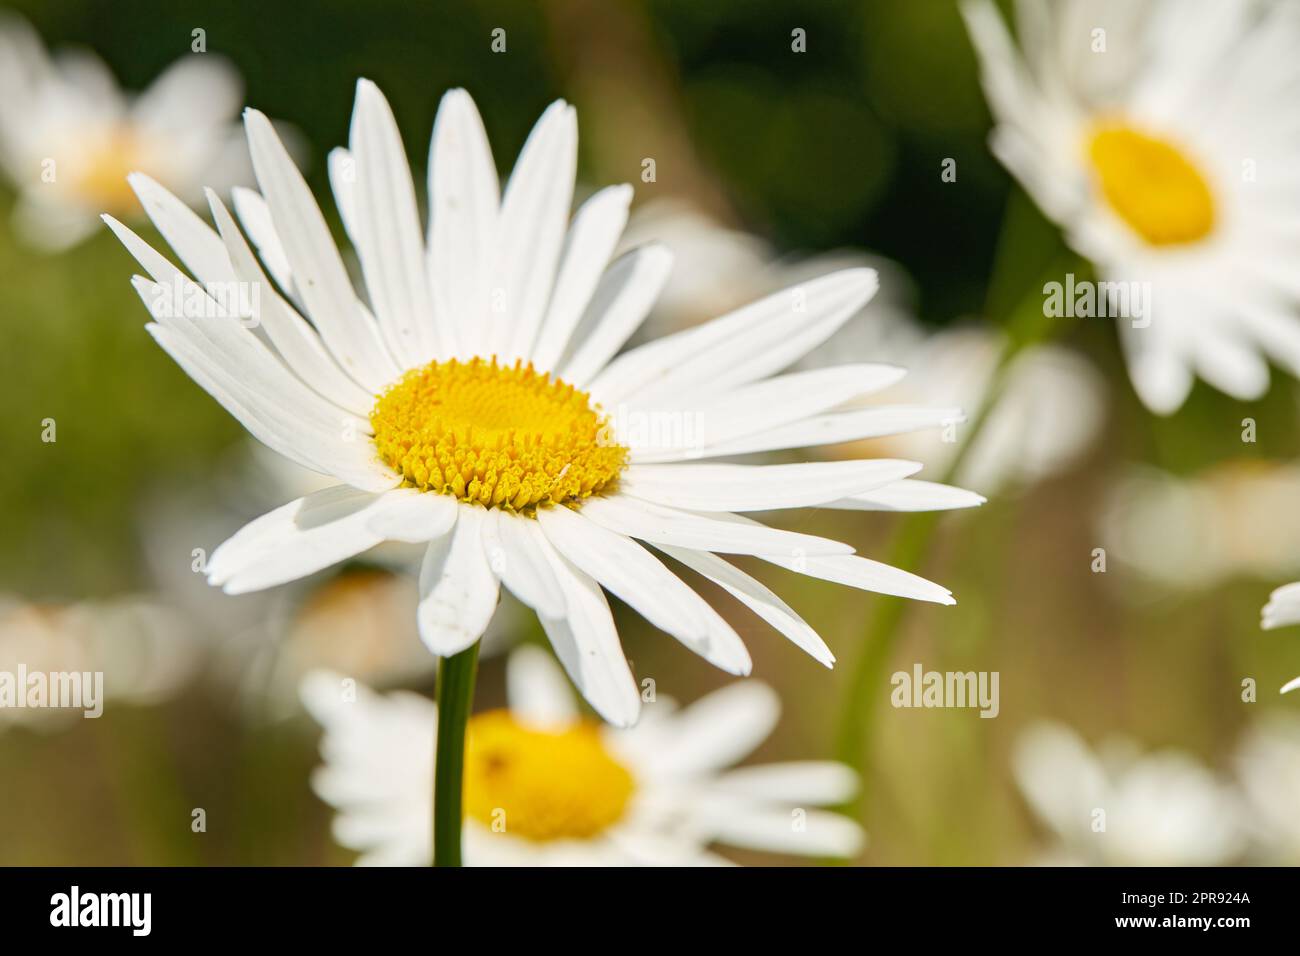 Daisy flowers growing in a field or botanical garden on a sunny day outdoors. Shasta or max chrysanthemum daisies from the asteraceae species with white petals and yellow pistil blooming in spring Stock Photo